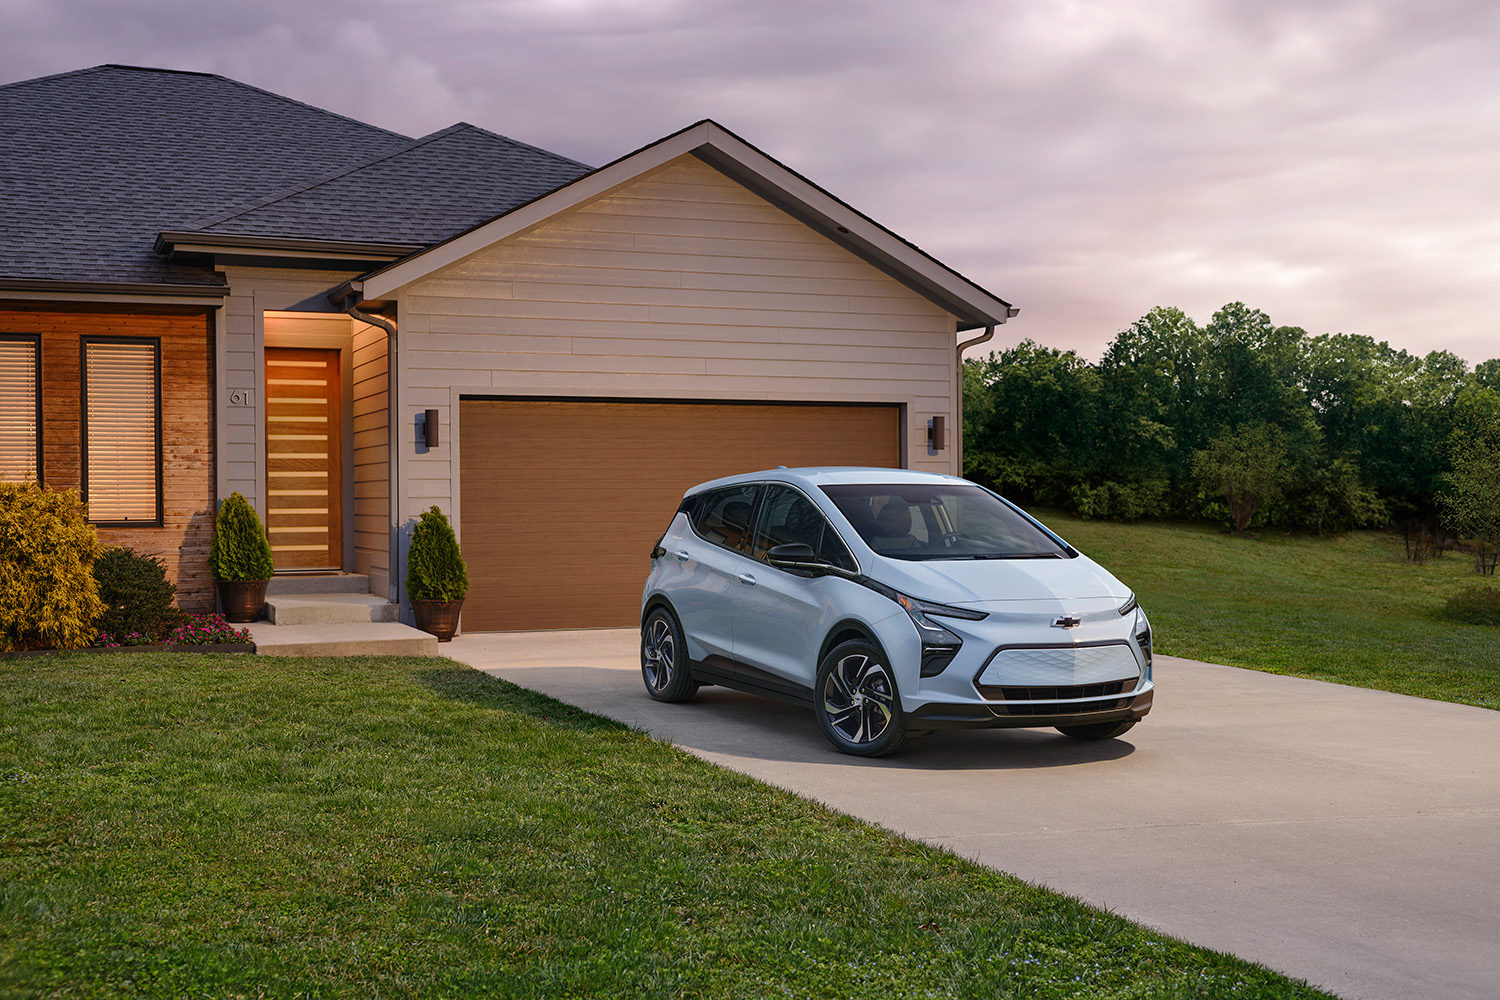 2023 Chevy Bolt EV parked in driveway during sunset